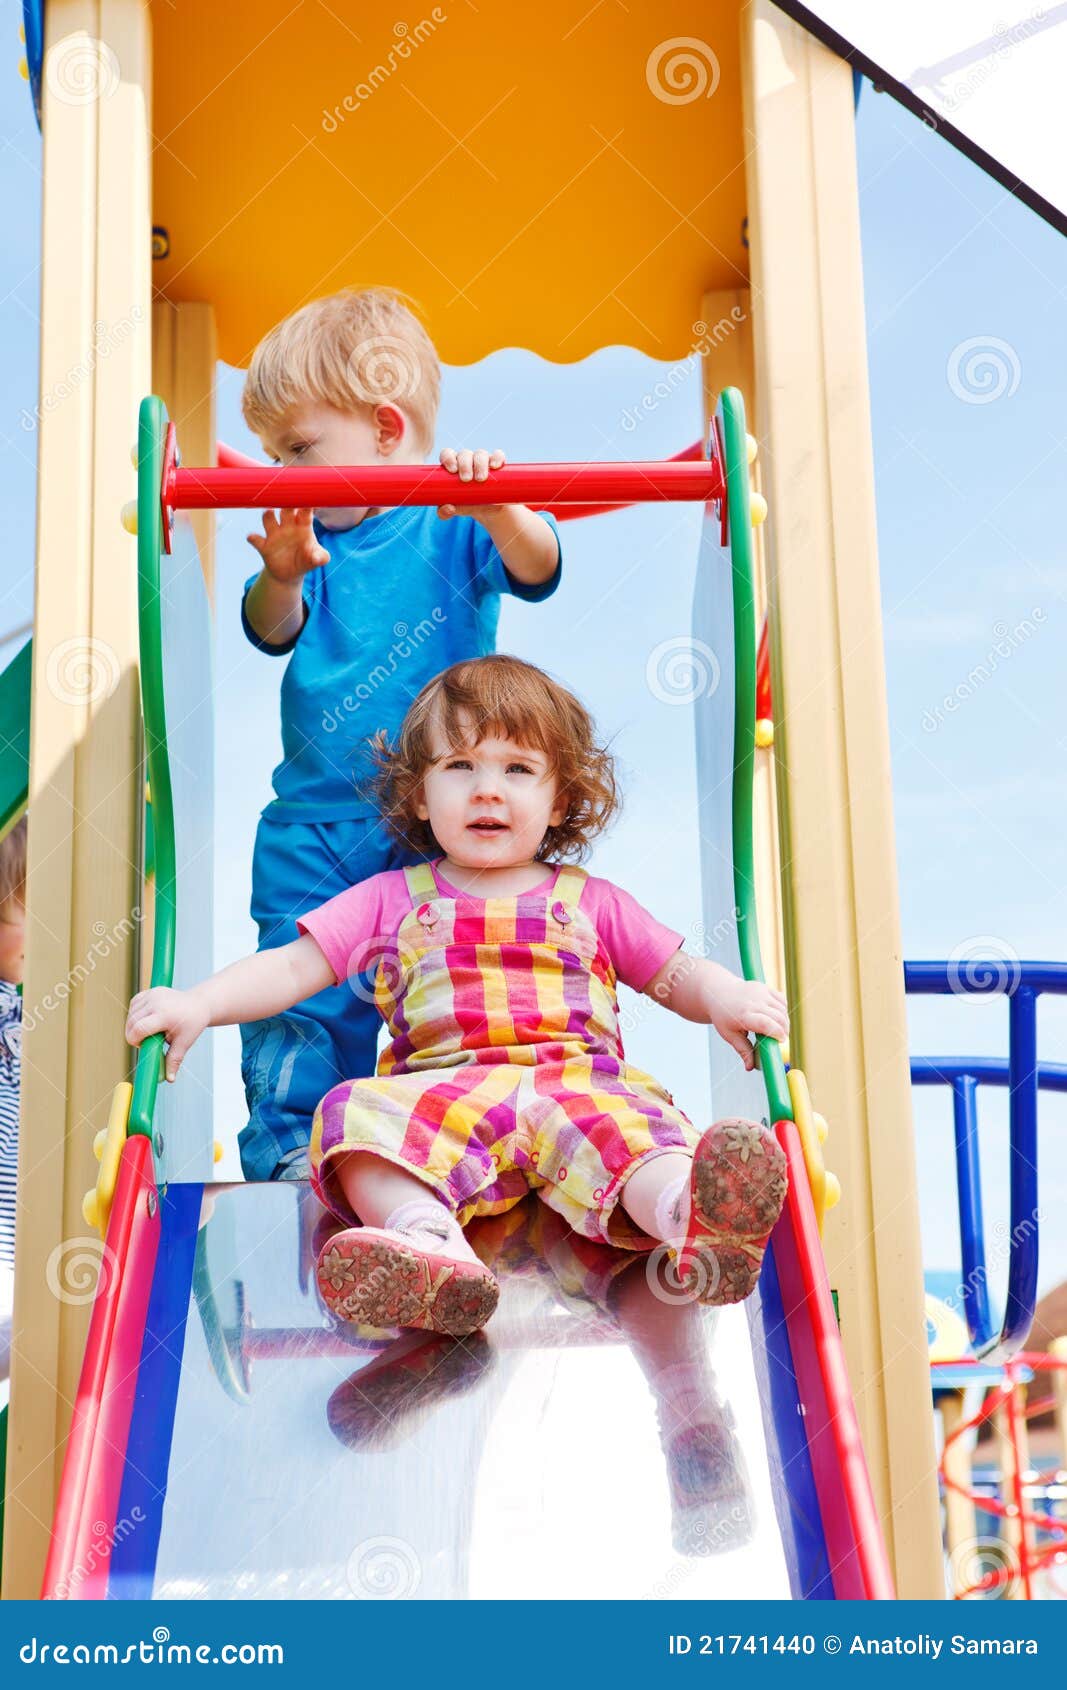 toddlers on a chute